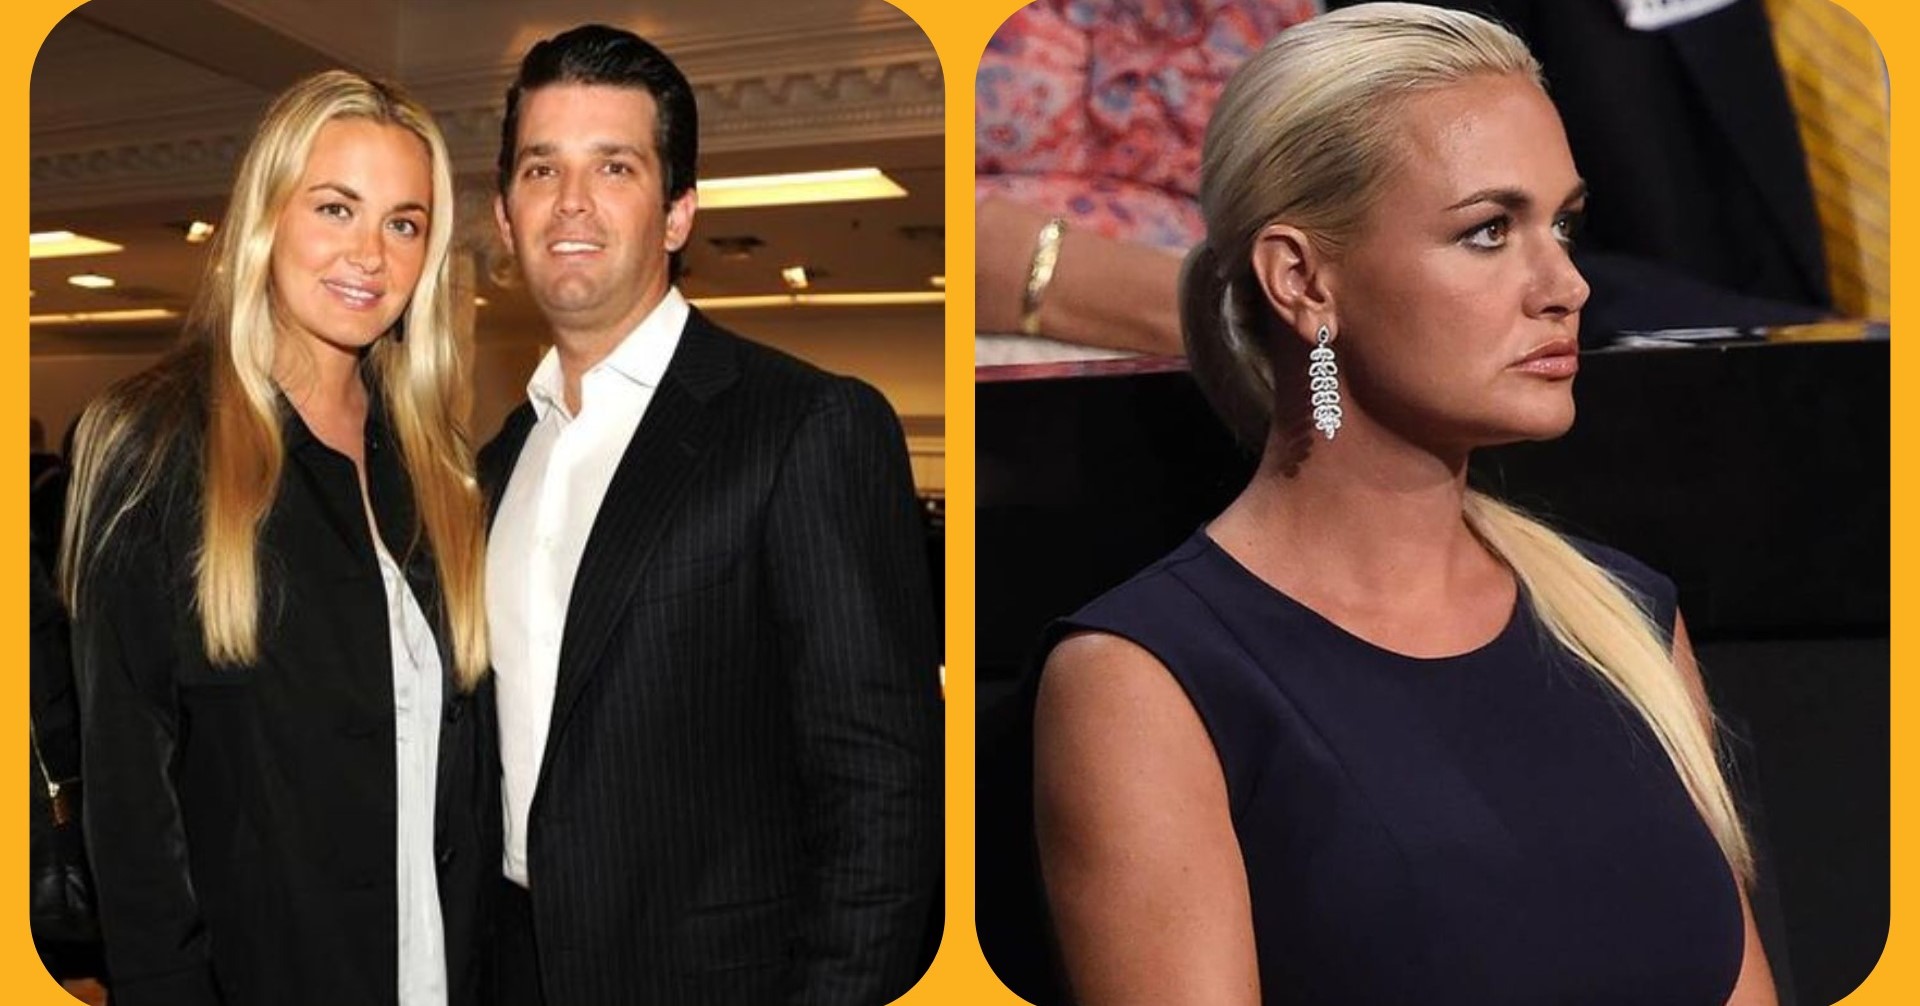 Vanessa Trump, ex-wife of Donald Trump Jr., has once again found herself in the spotlight after being caught leaving Trump International Golf Course in West Palm Beach, Florida, accompanied by a former member of her Secret Service detail